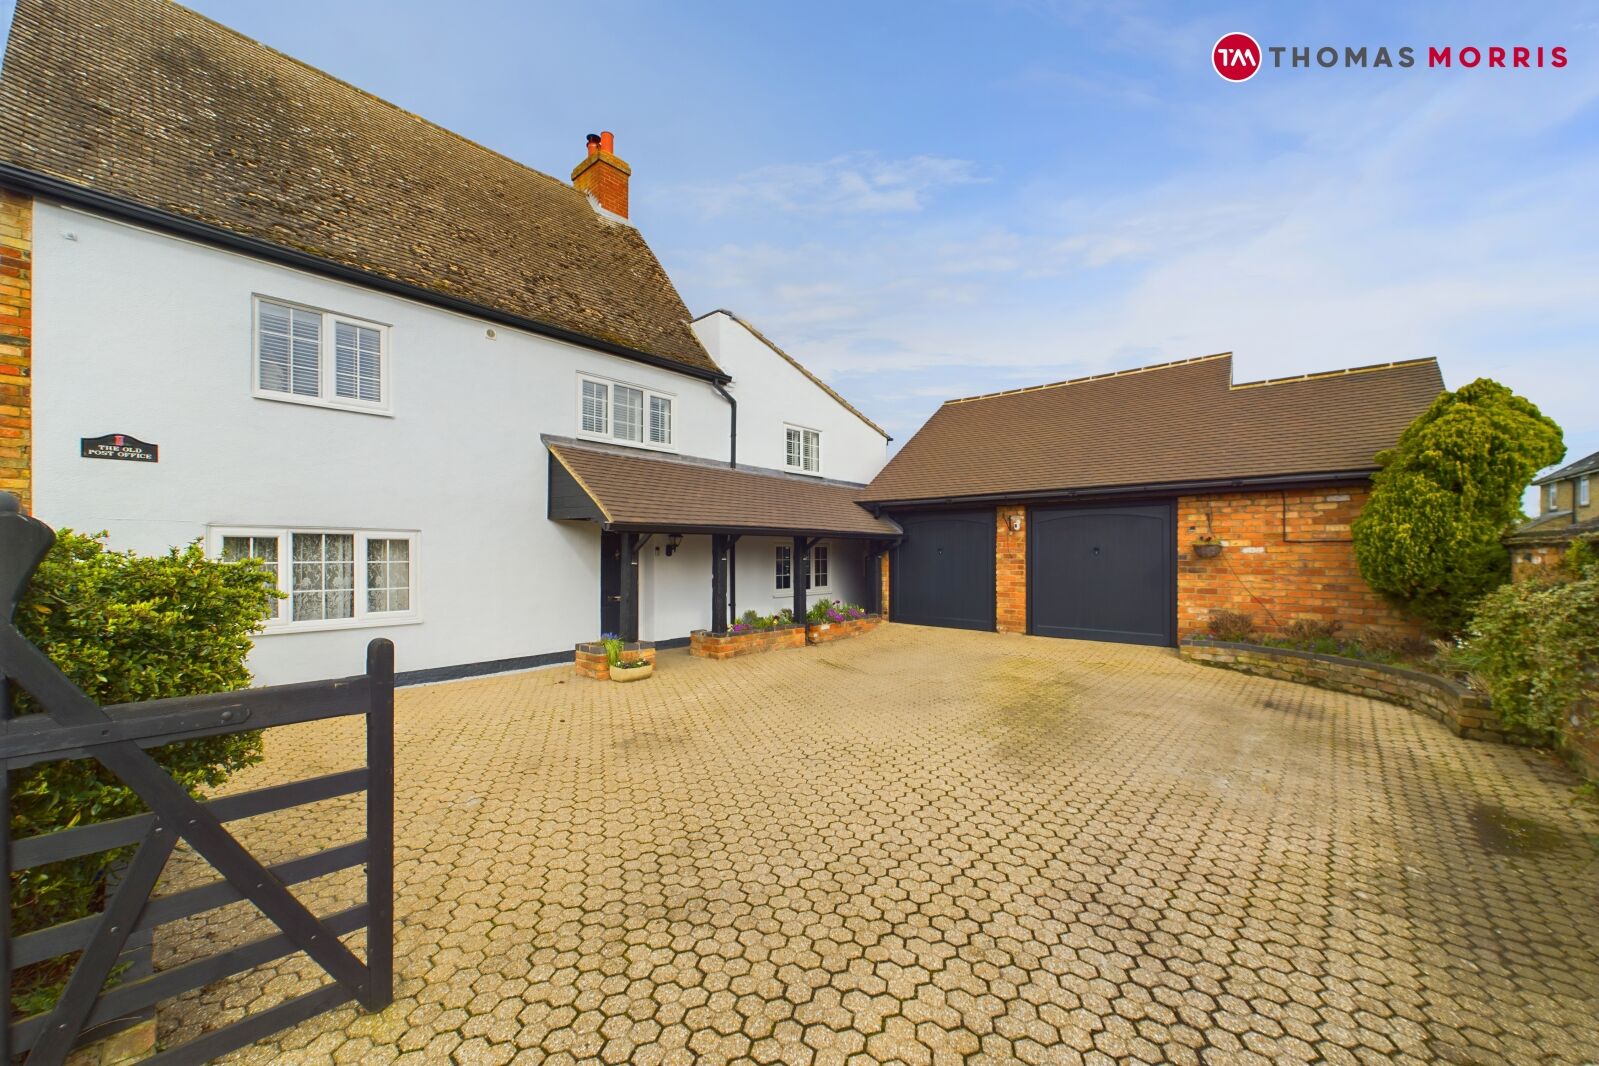 4 bedroom detached house for sale Great North Road, Wyboston, MK44, main image